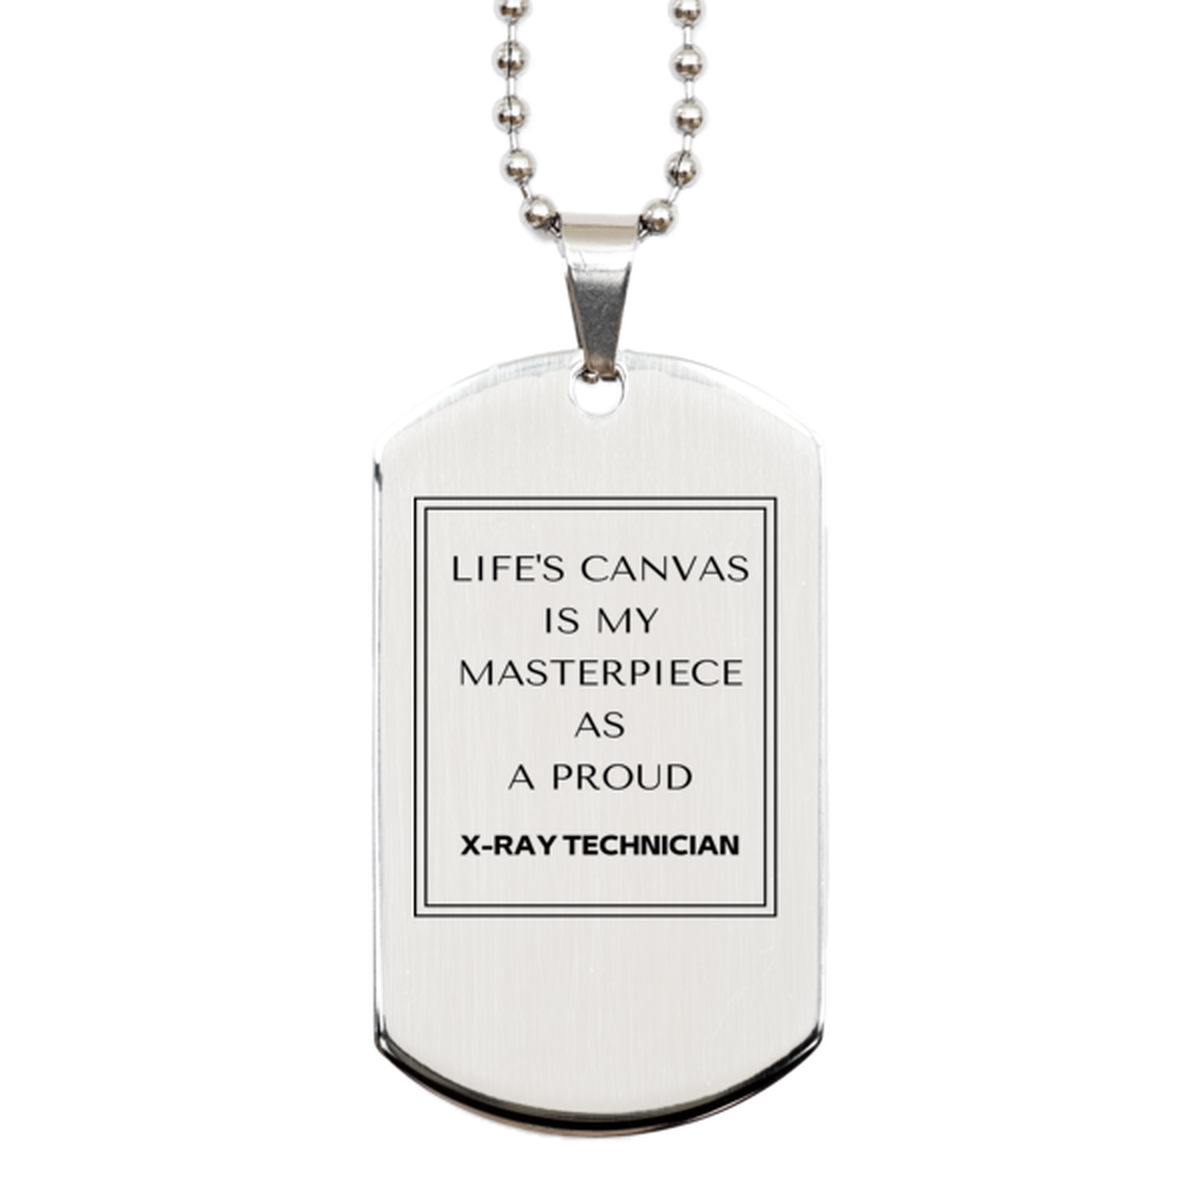 Proud X-Ray Technician Gifts, Life's canvas is my masterpiece, Epic Birthday Christmas Unique Silver Dog Tag For X-Ray Technician, Coworkers, Men, Women, Friends